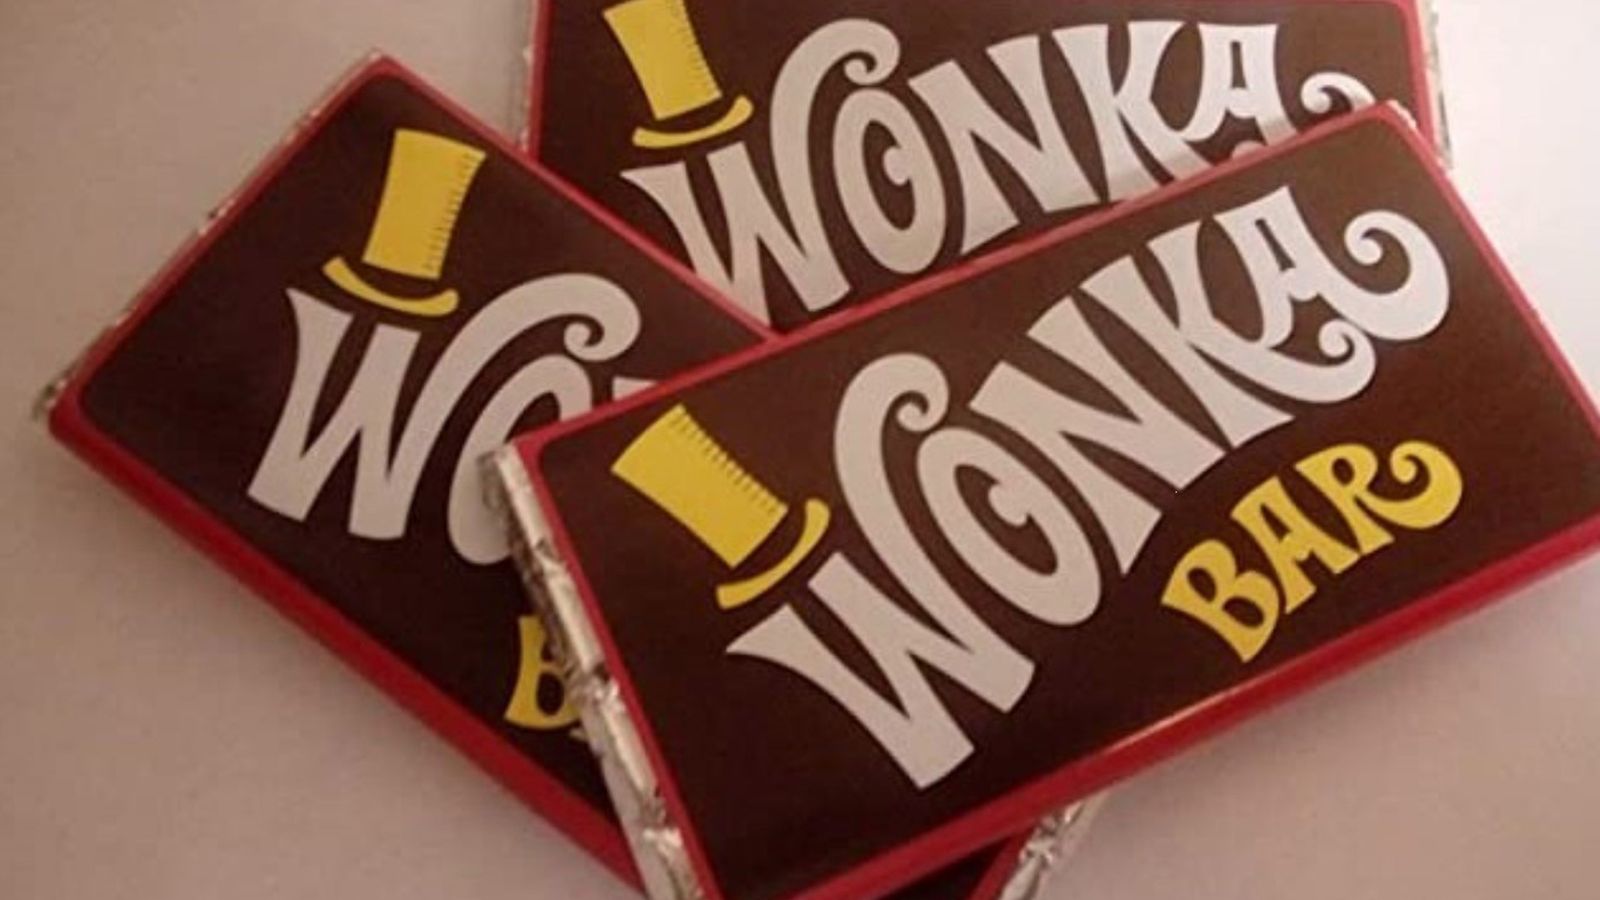 Shoppers told to avoid fake Wonka and Prime-branded chocolate bars